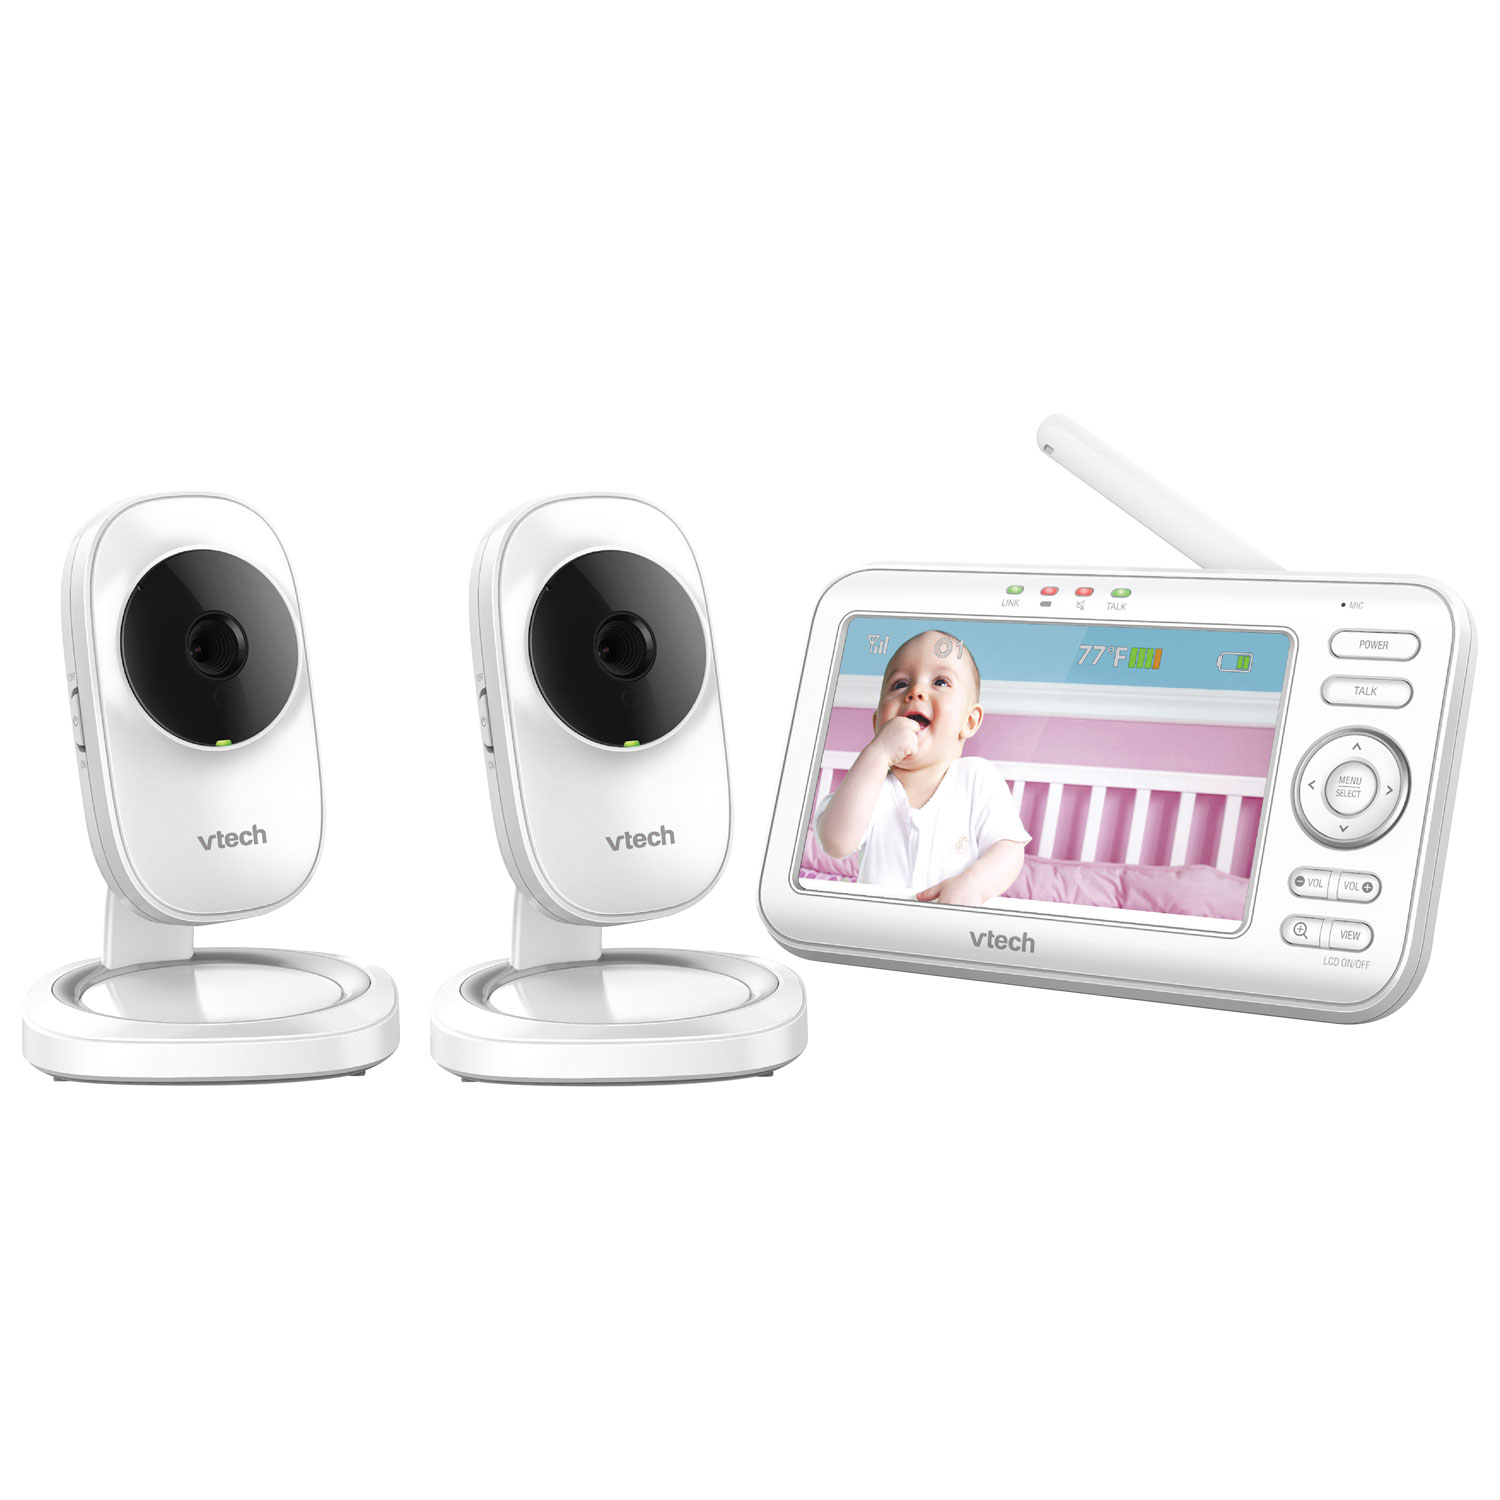 Vtech 5 Video Baby Monitor With Night Vision And 2 Cameras Vm5251 2 Only At Best Buy Best Buy Canada